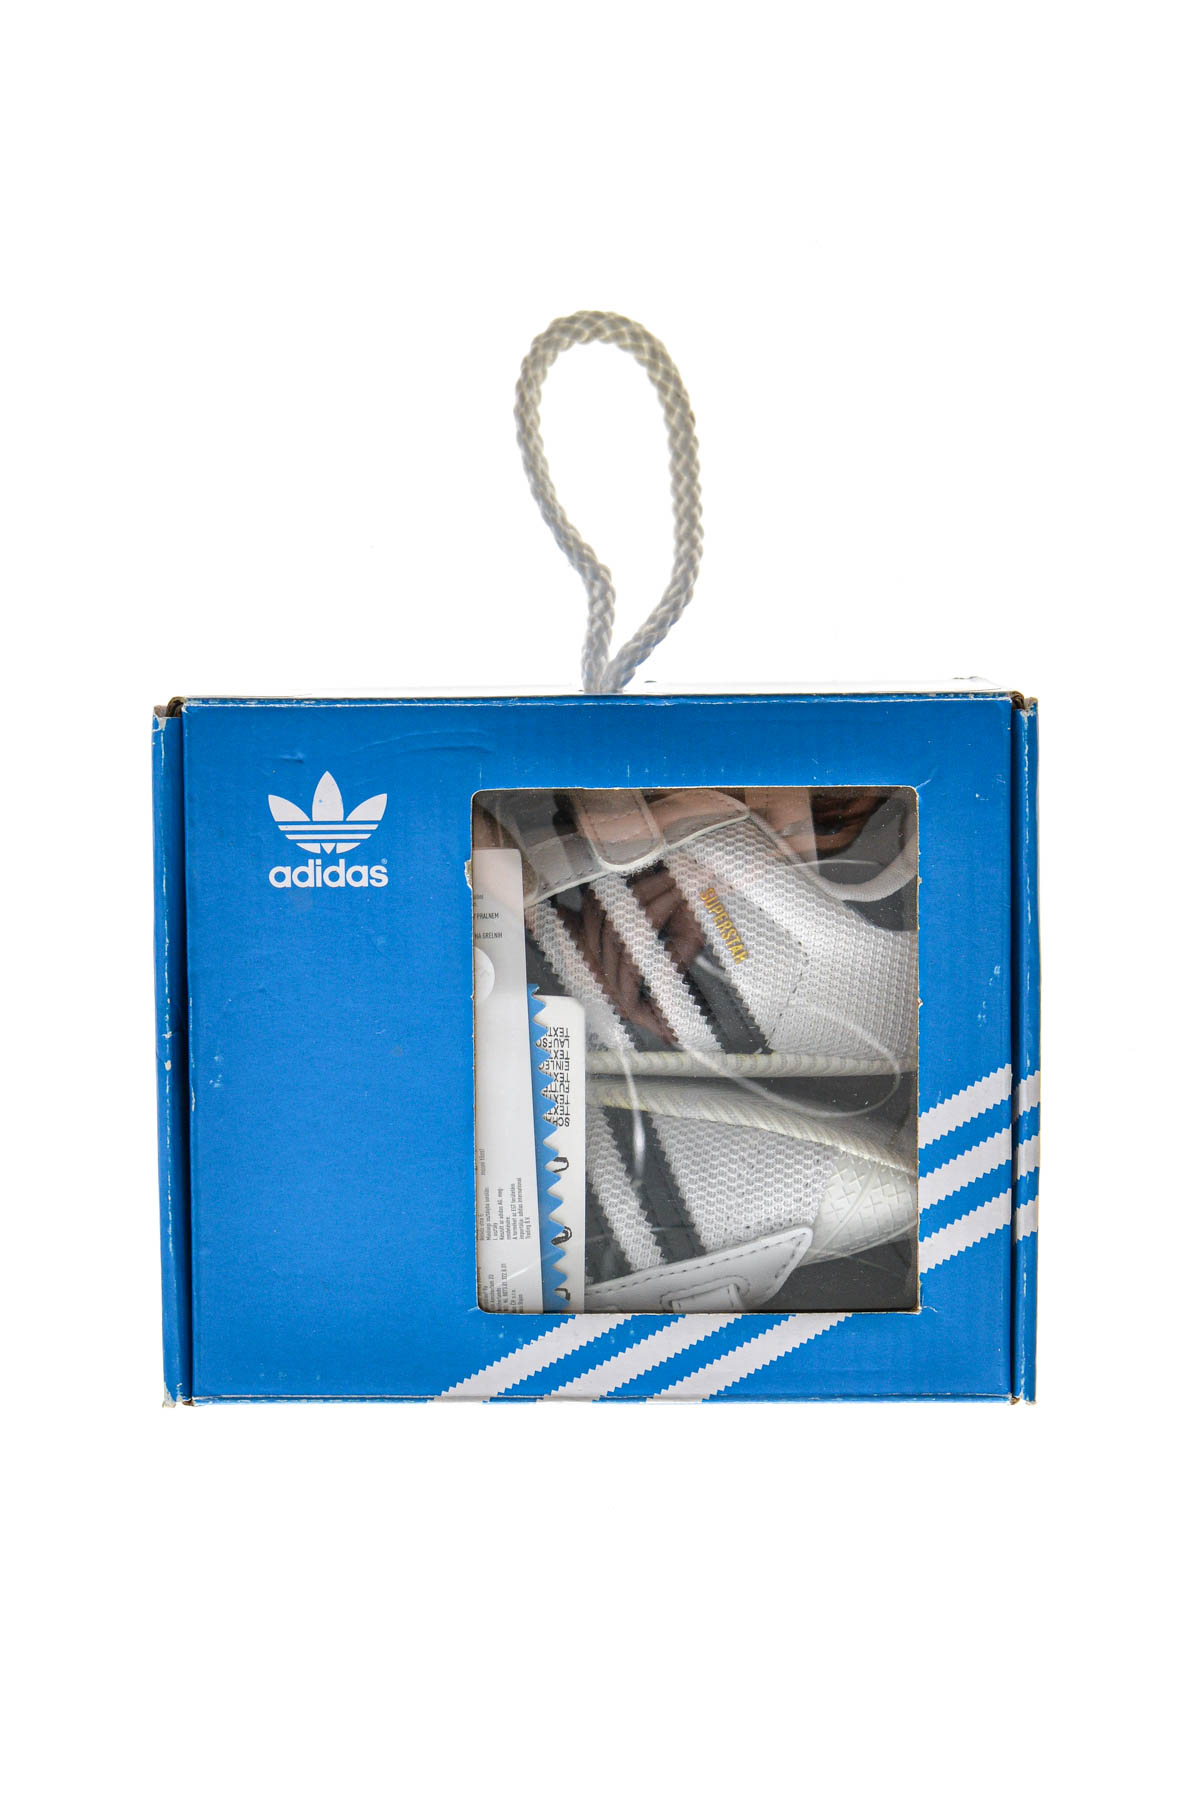 Baby boots - Adidas - 4